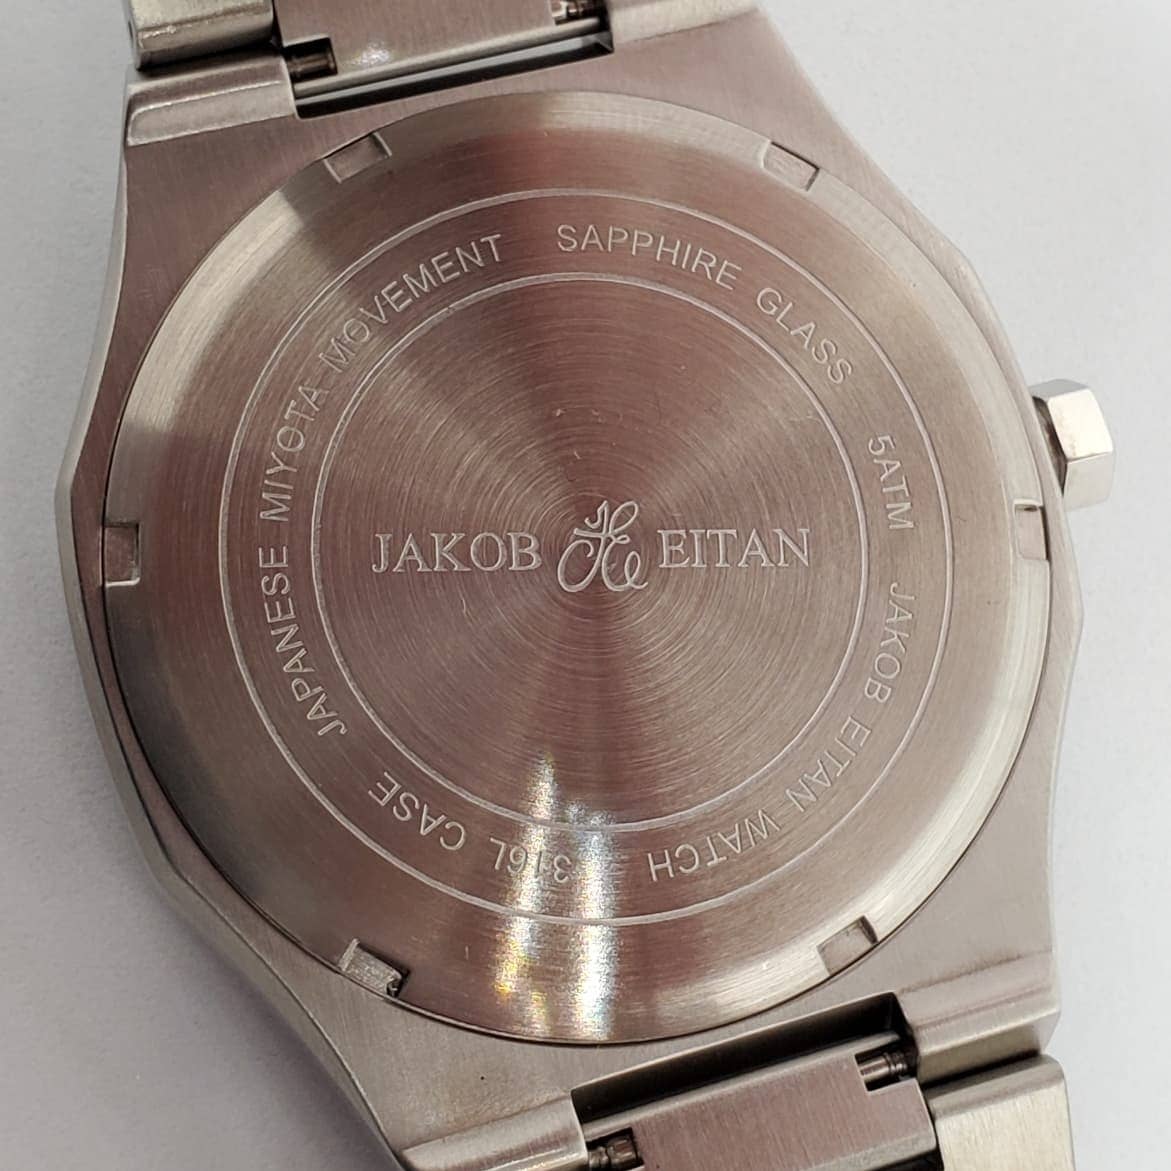 Jakob Eitan 41mm Sports Watch with Black Dial and Stainless Steel case and Bracelet